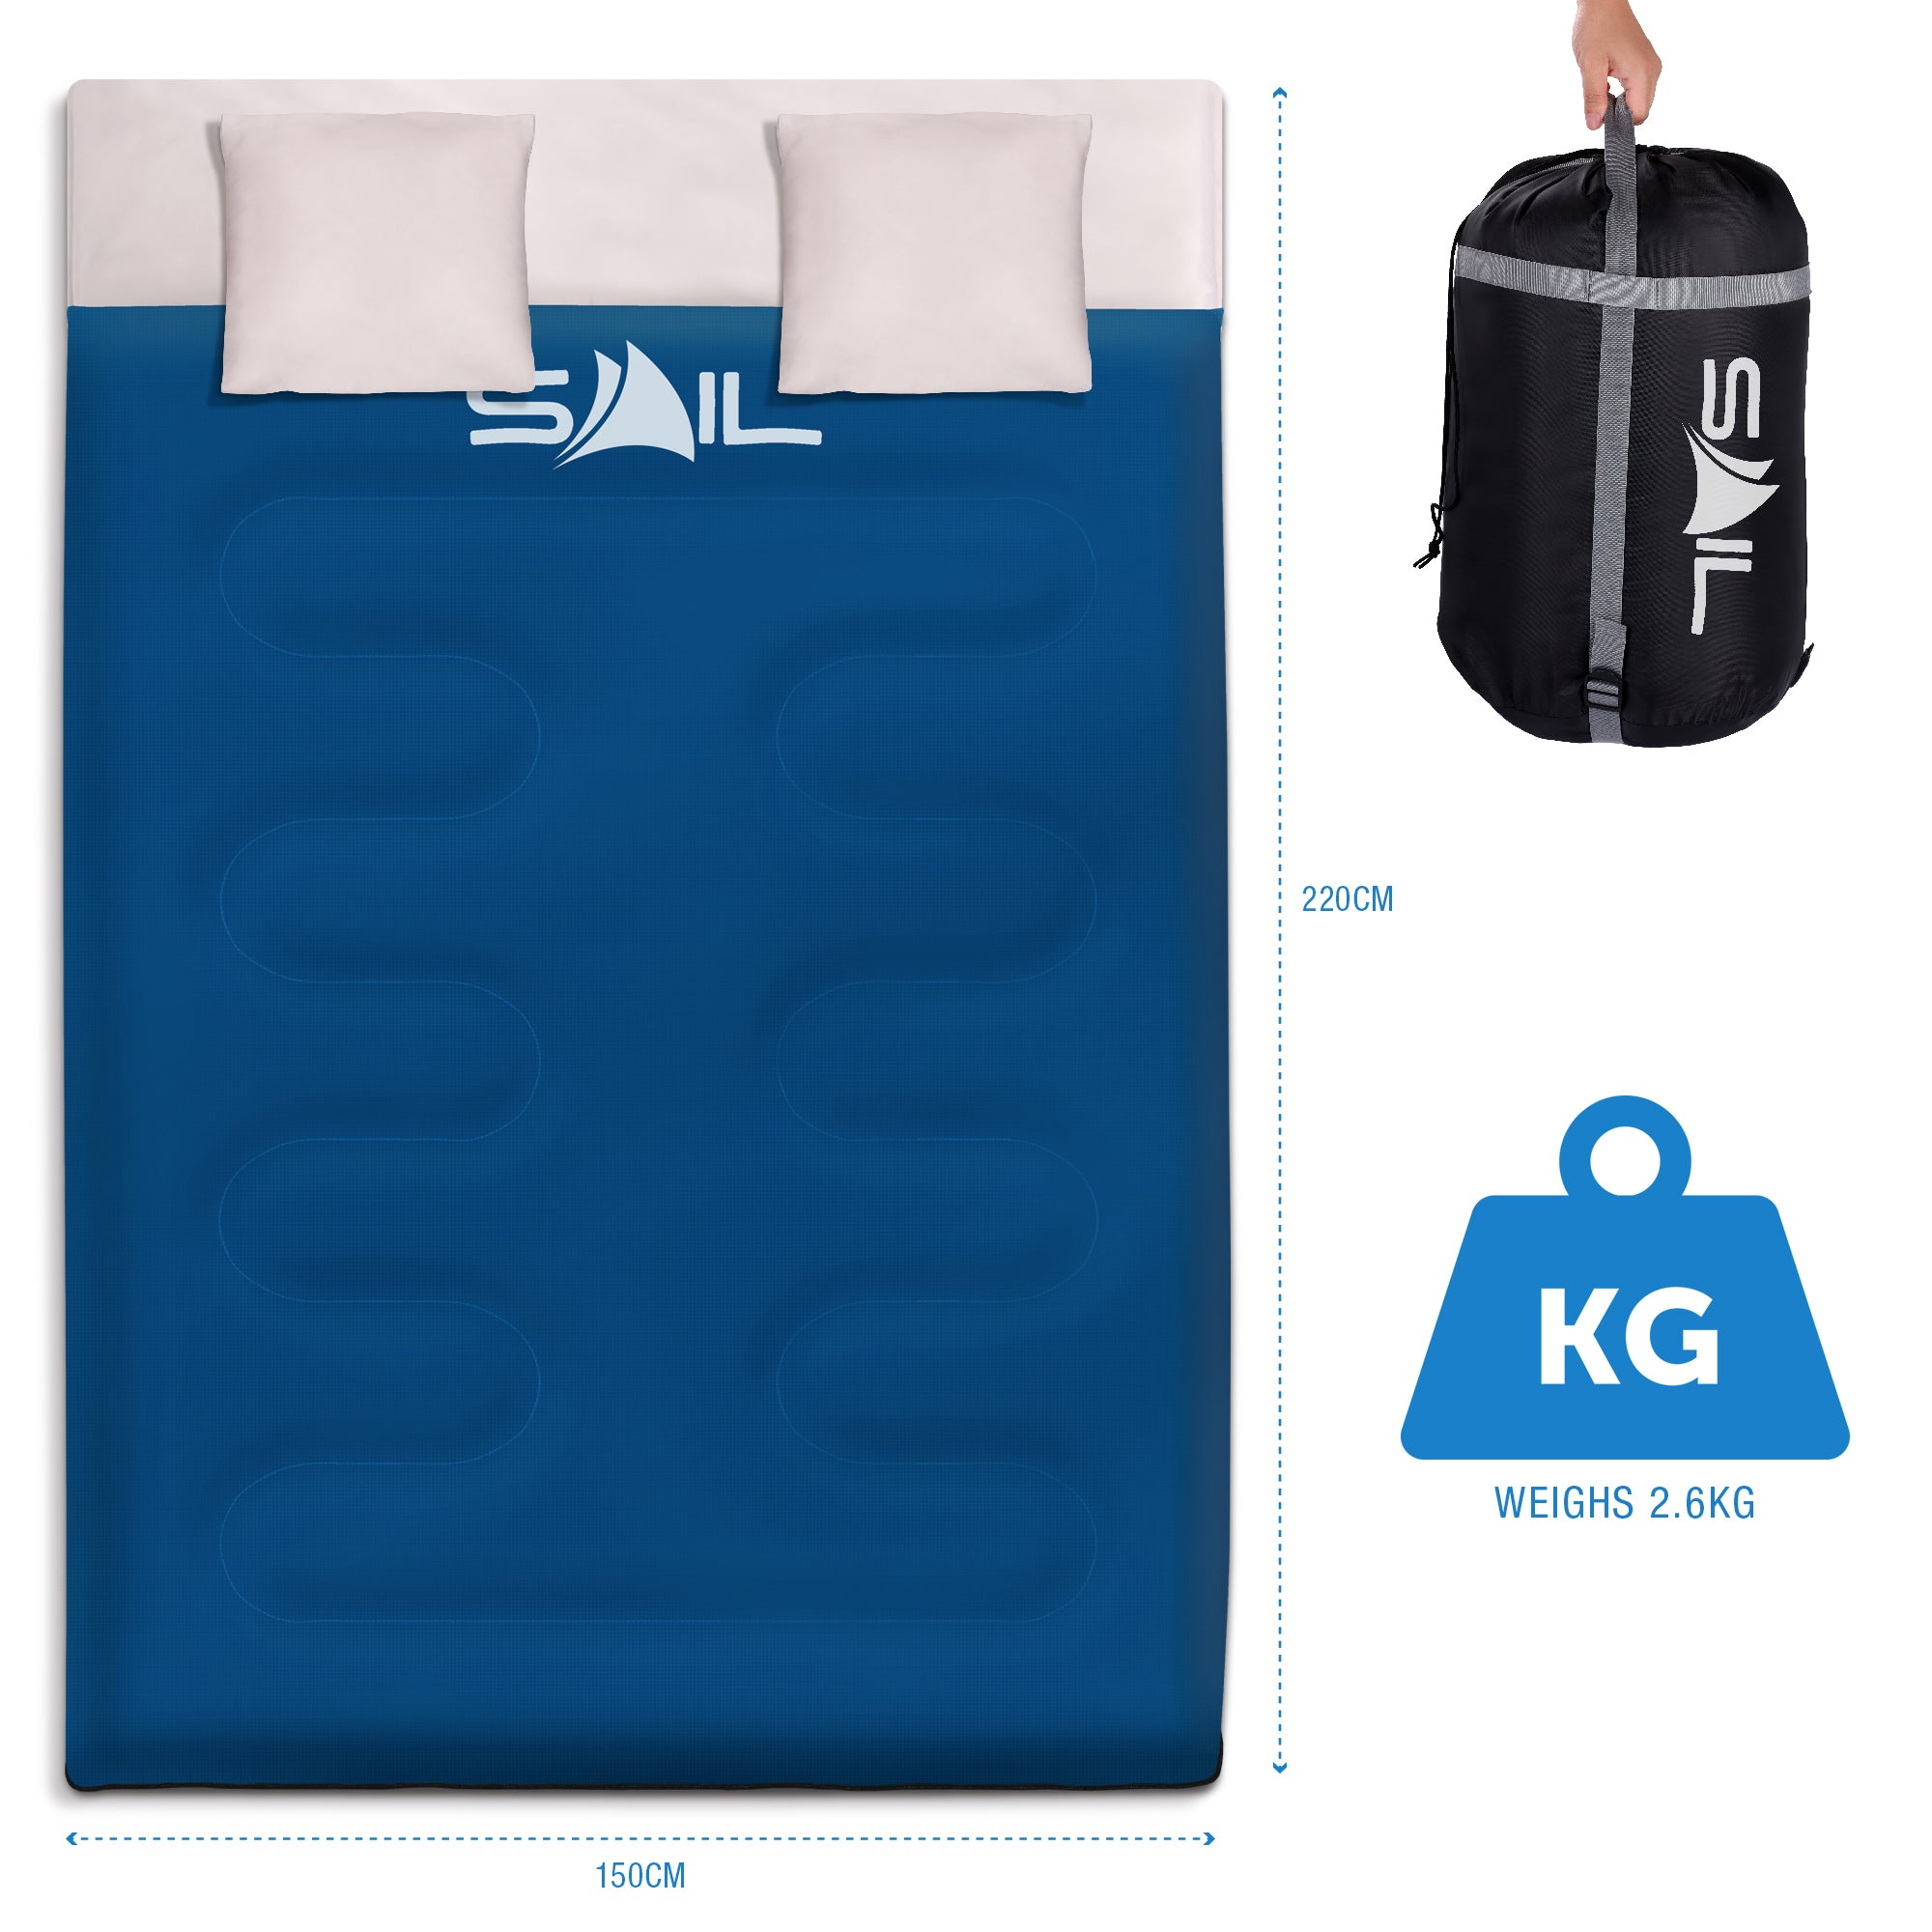 SAIL 'Buddy' Double Sleeping Bag with 2 Pillows - Extra Large for 3-4 Season